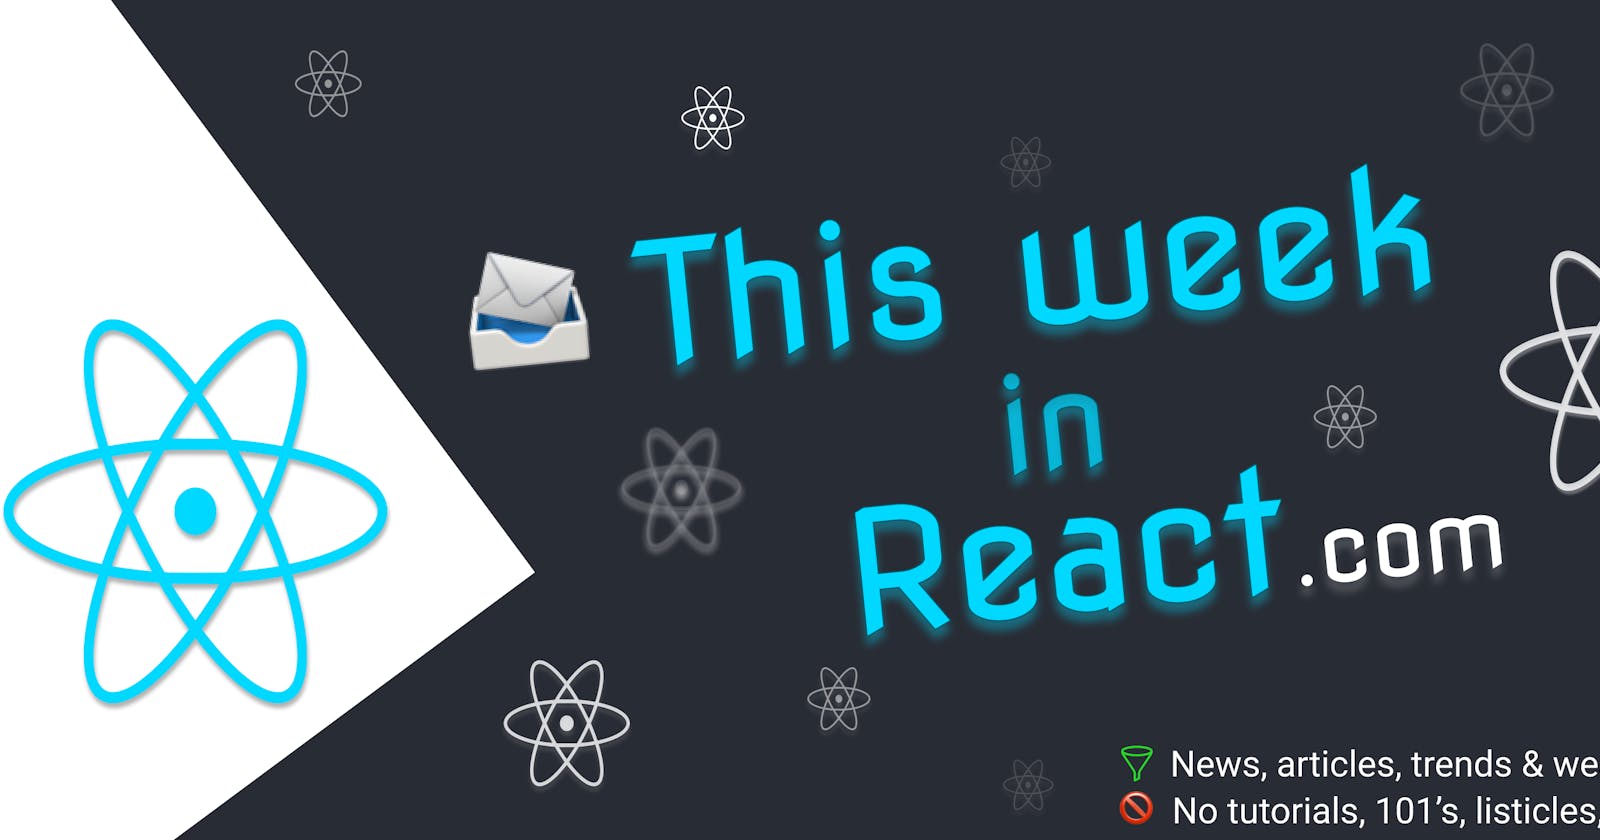 This Week In React #167: Aria Components, Hydration, Remix, Server Components, useSyncExternalStore, cache, perf, Glow, Unistyles, Expo, :has(), Tailw